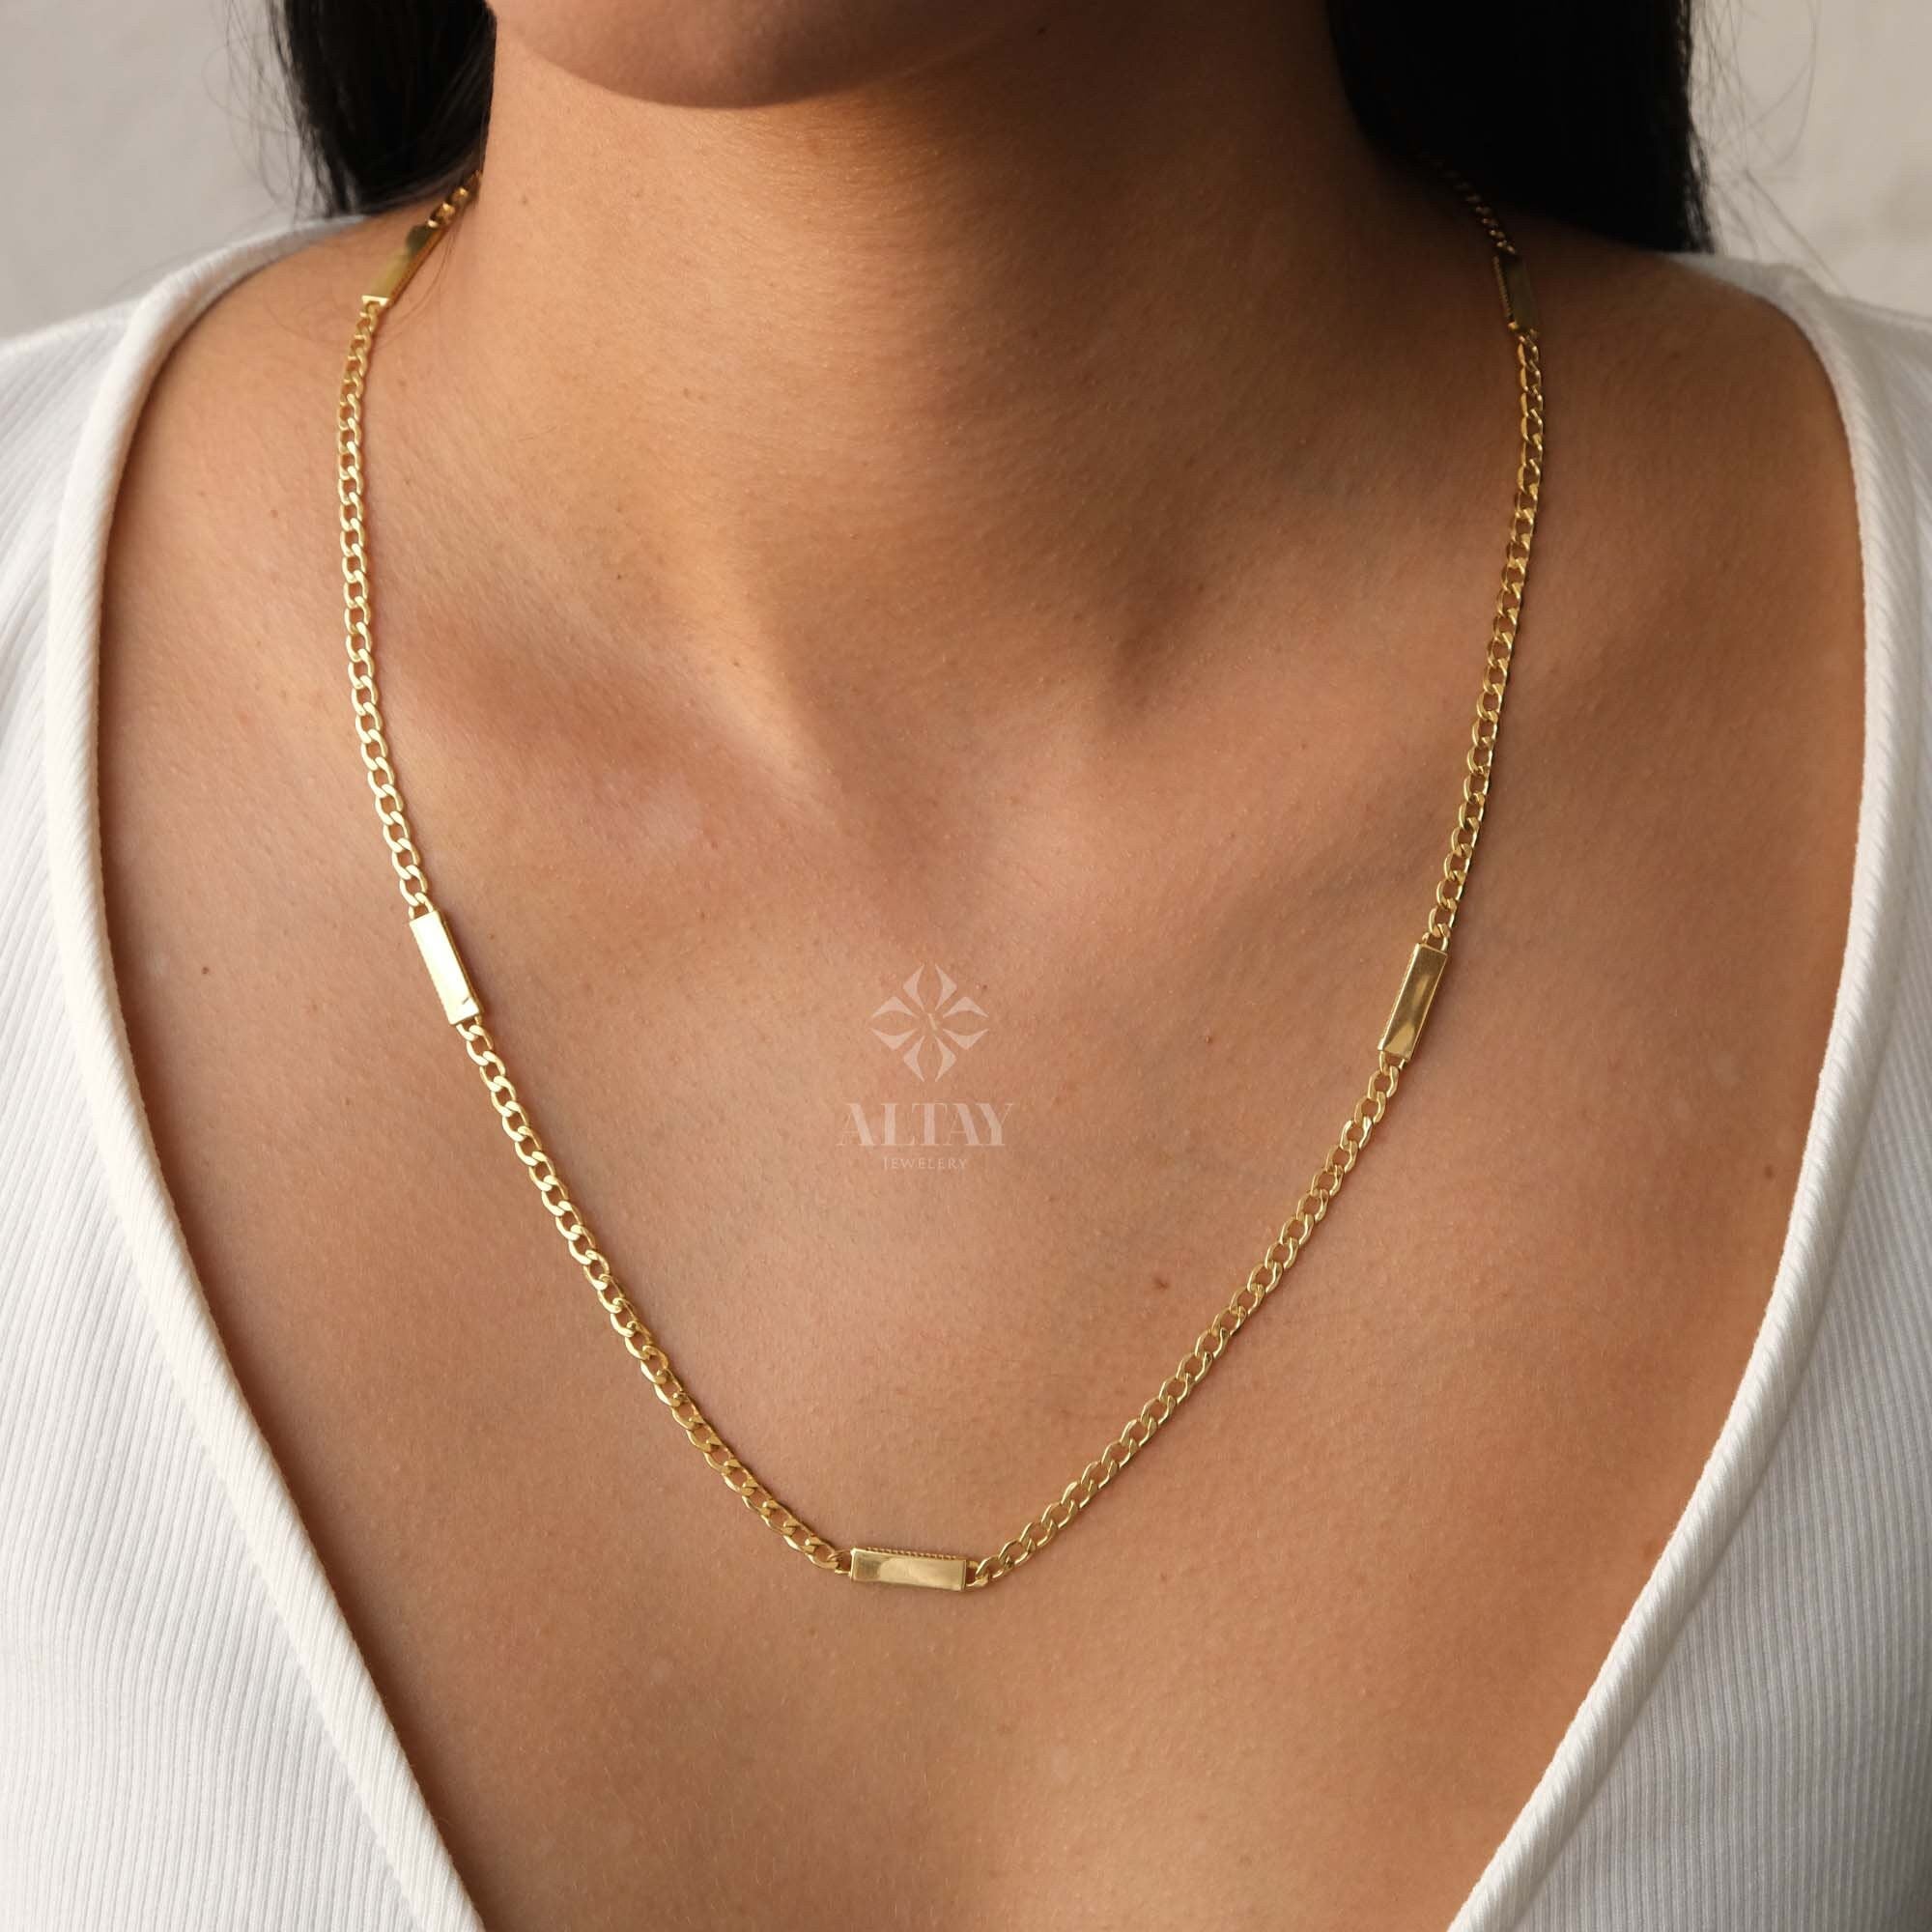 14K Gold Cuban Link Necklace, Dainty Bar Necklace, Curb Chunky Engraved Necklace, Skinny Bar Necklace, Stacking Necklace, Men Women Chain